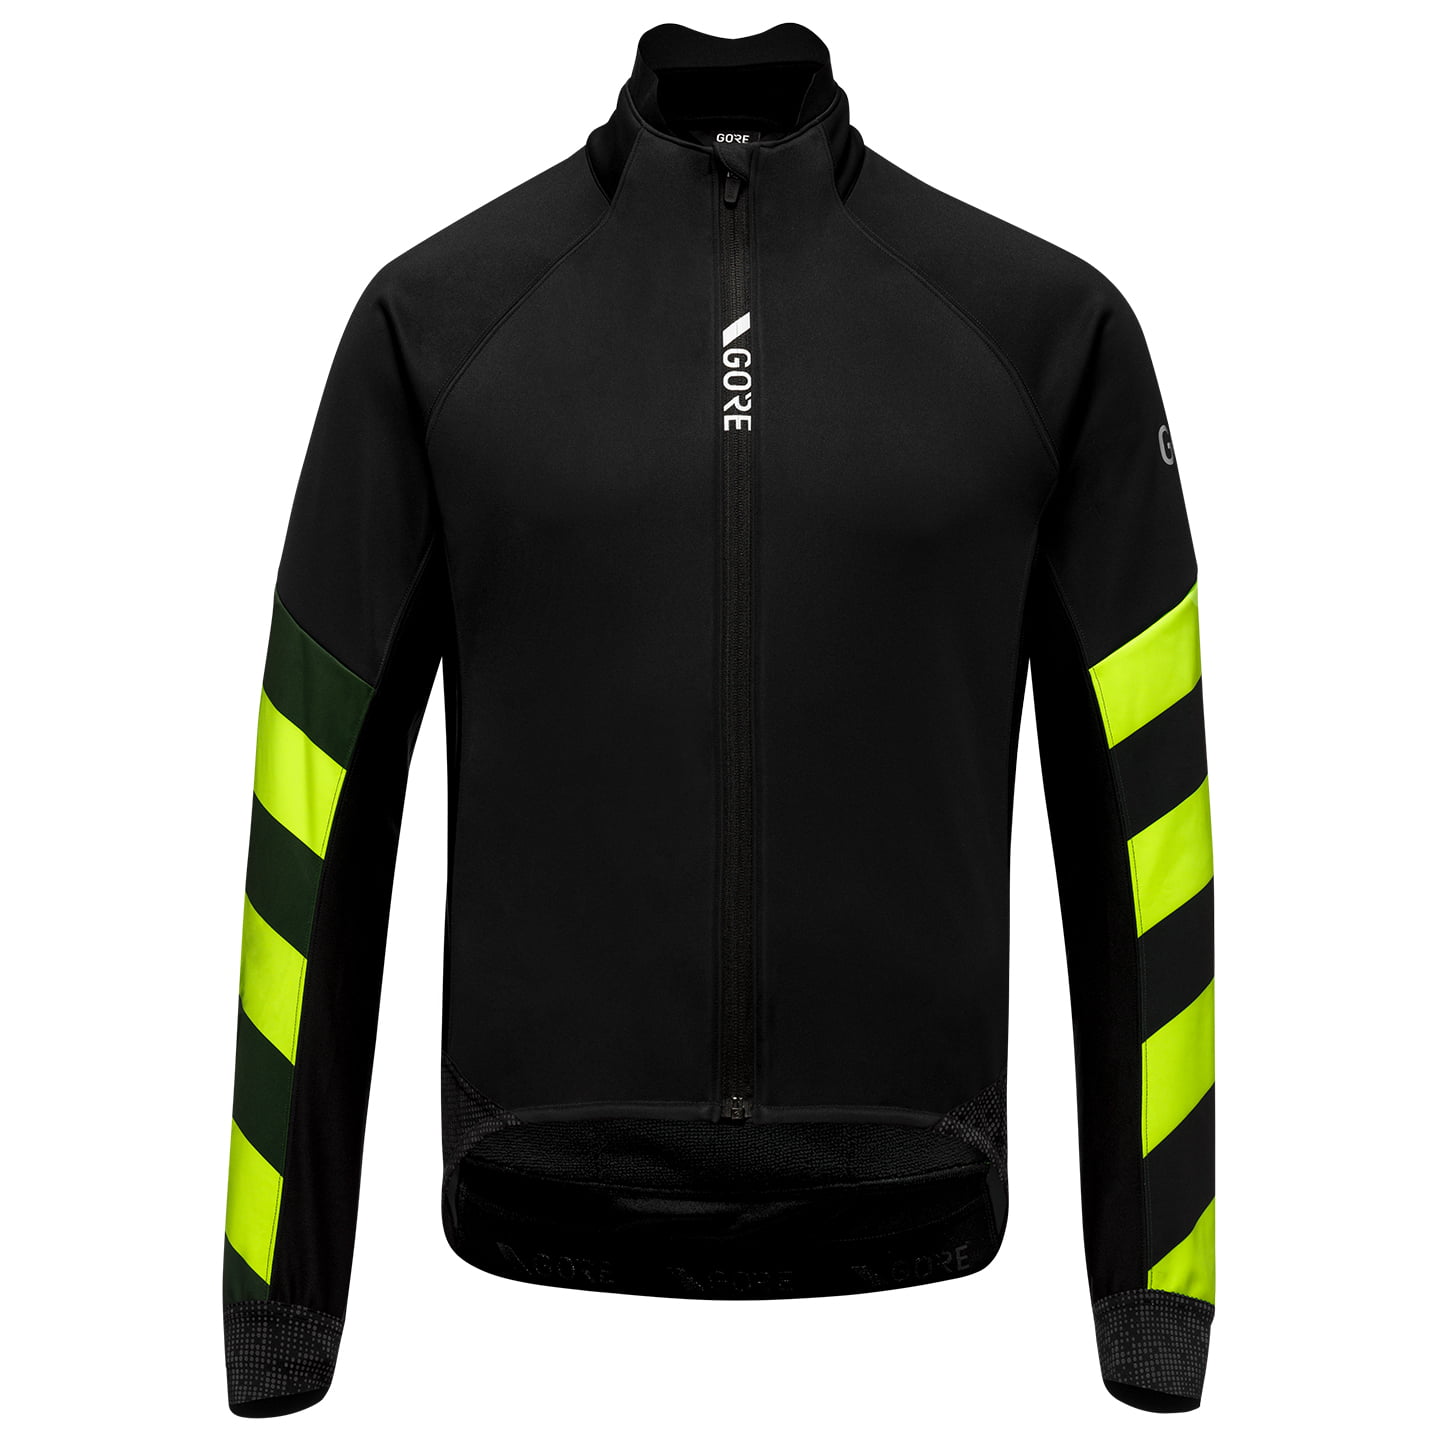 GORE WEAR Winter Jacket C5 Gore-Tex Infinium Signal Thermal Jacket, for men, size 2XL, Winter jacket, Cycling clothing